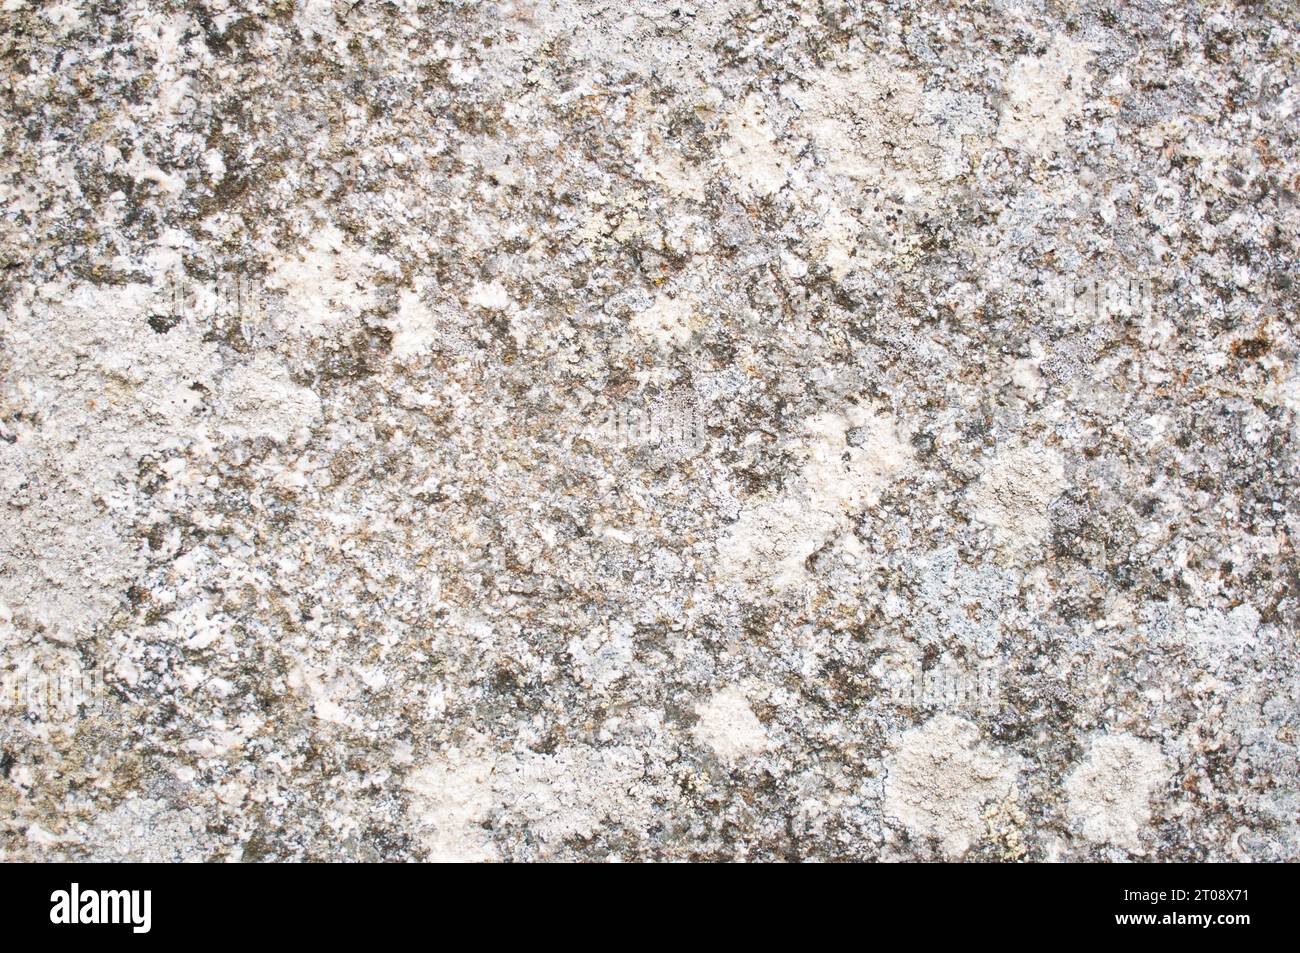 Close-up of lichen covered granite, ideal for use as a background - John Gollop Stock Photo